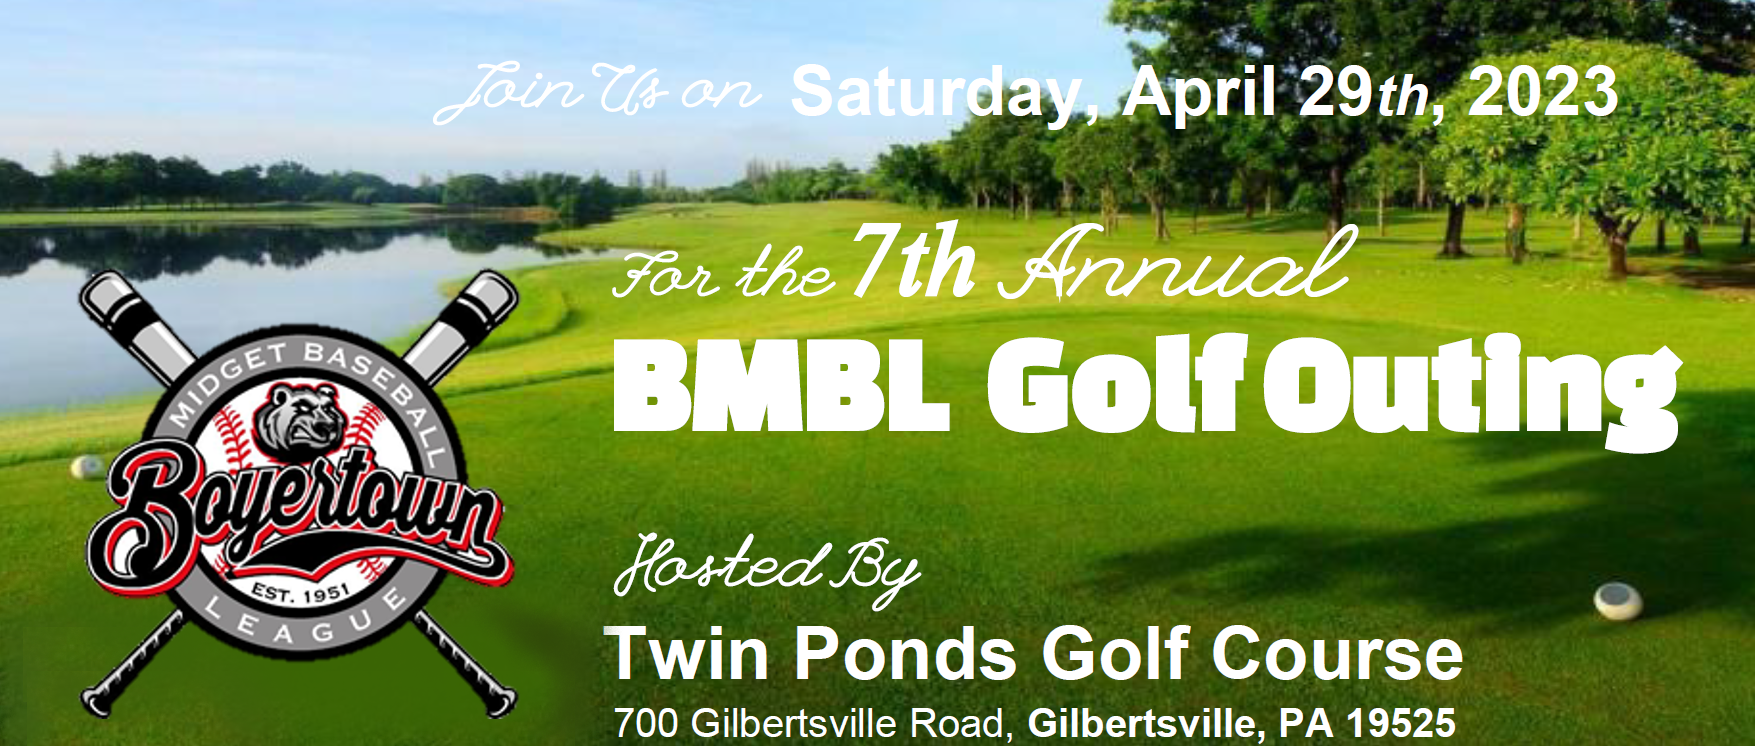 BMBL golf outing